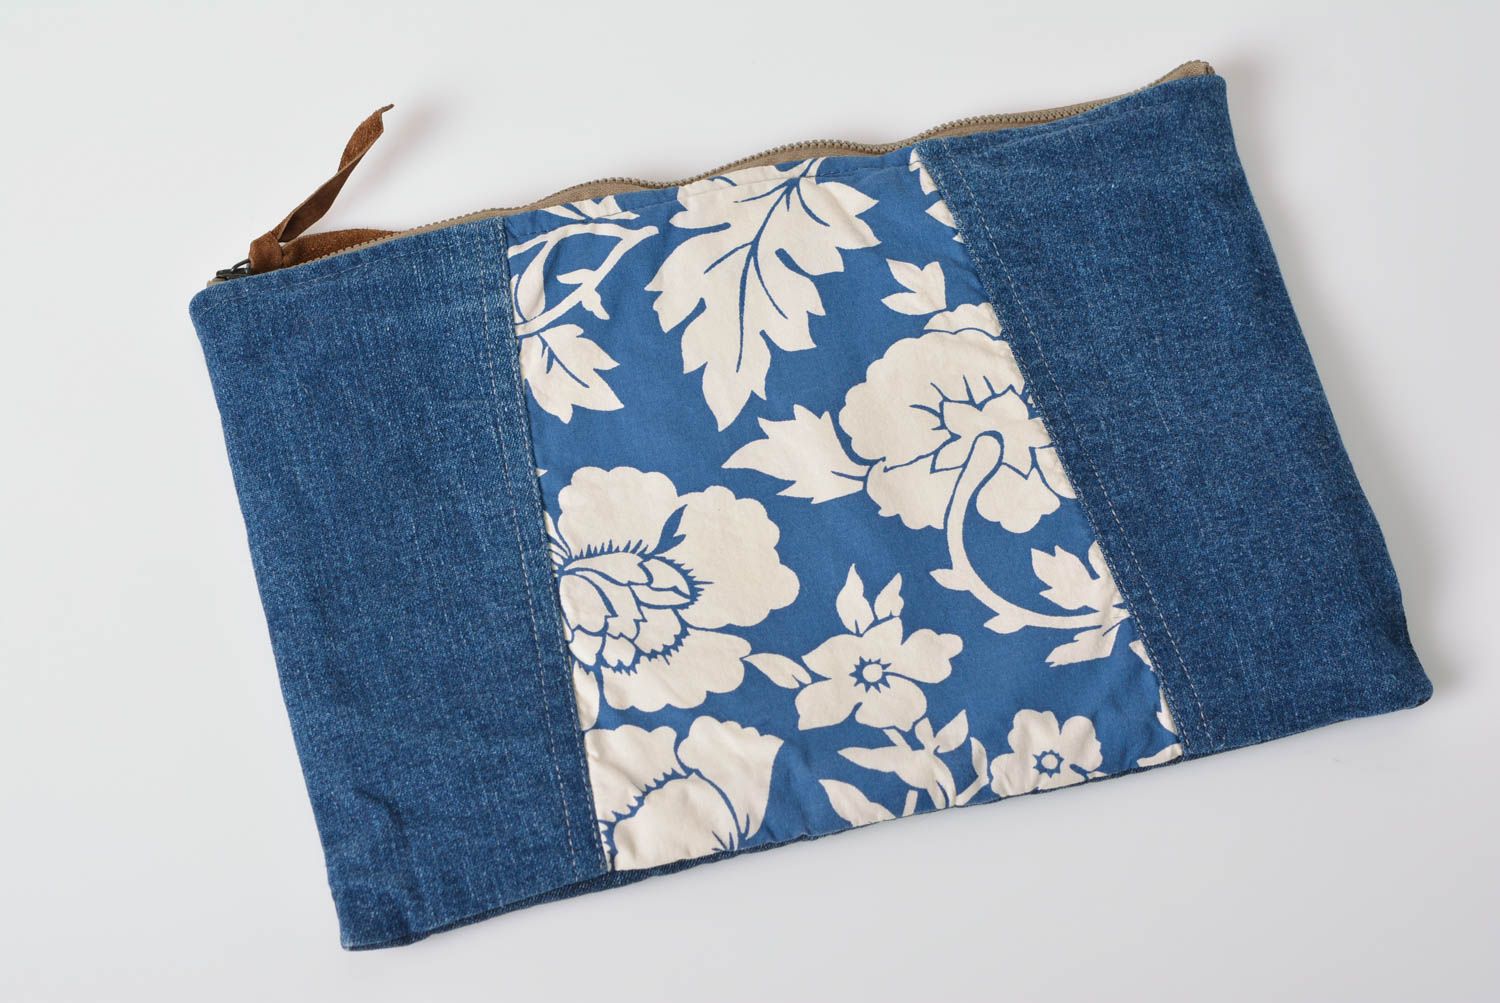 Handmade stylish clutch bag made of denim and cotton with zipper and loop photo 3